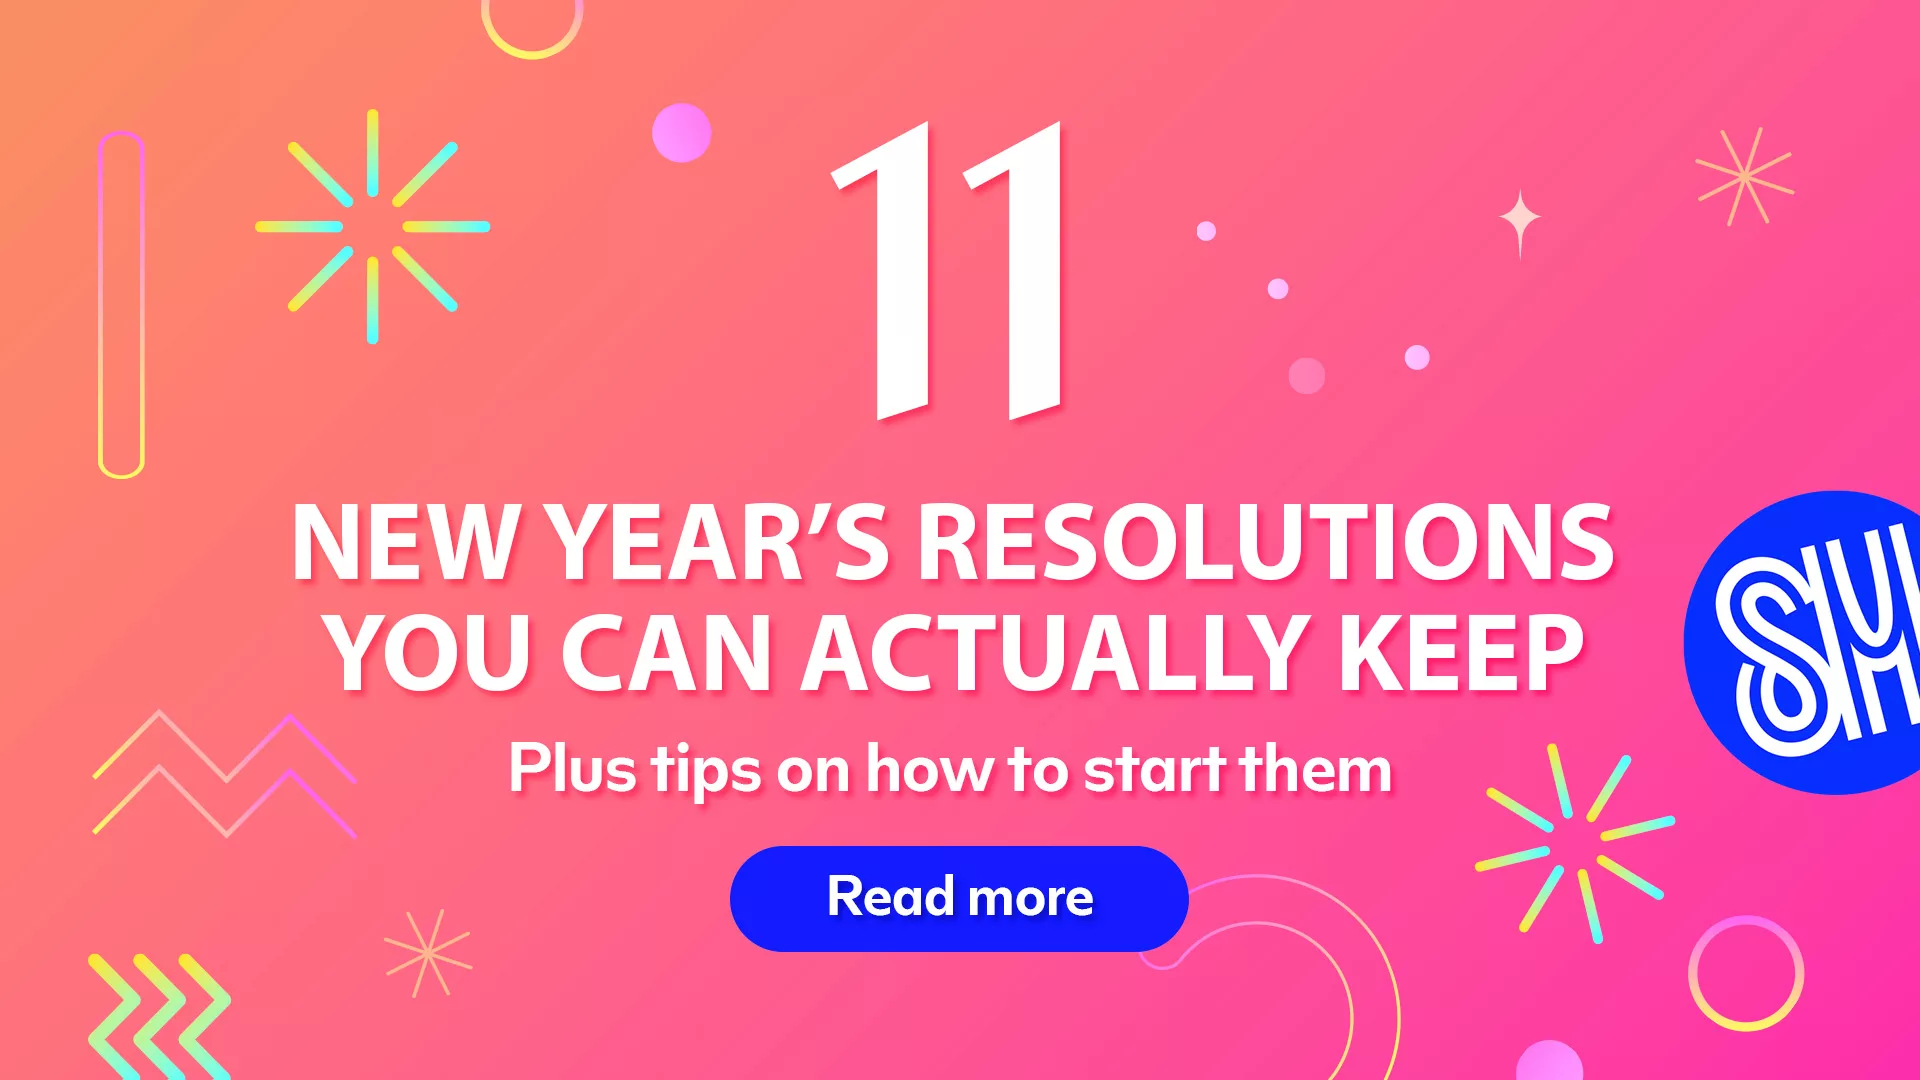 11 New Year’s Resolutions You Can Actually Keep.
Plus tips on how to start them.
